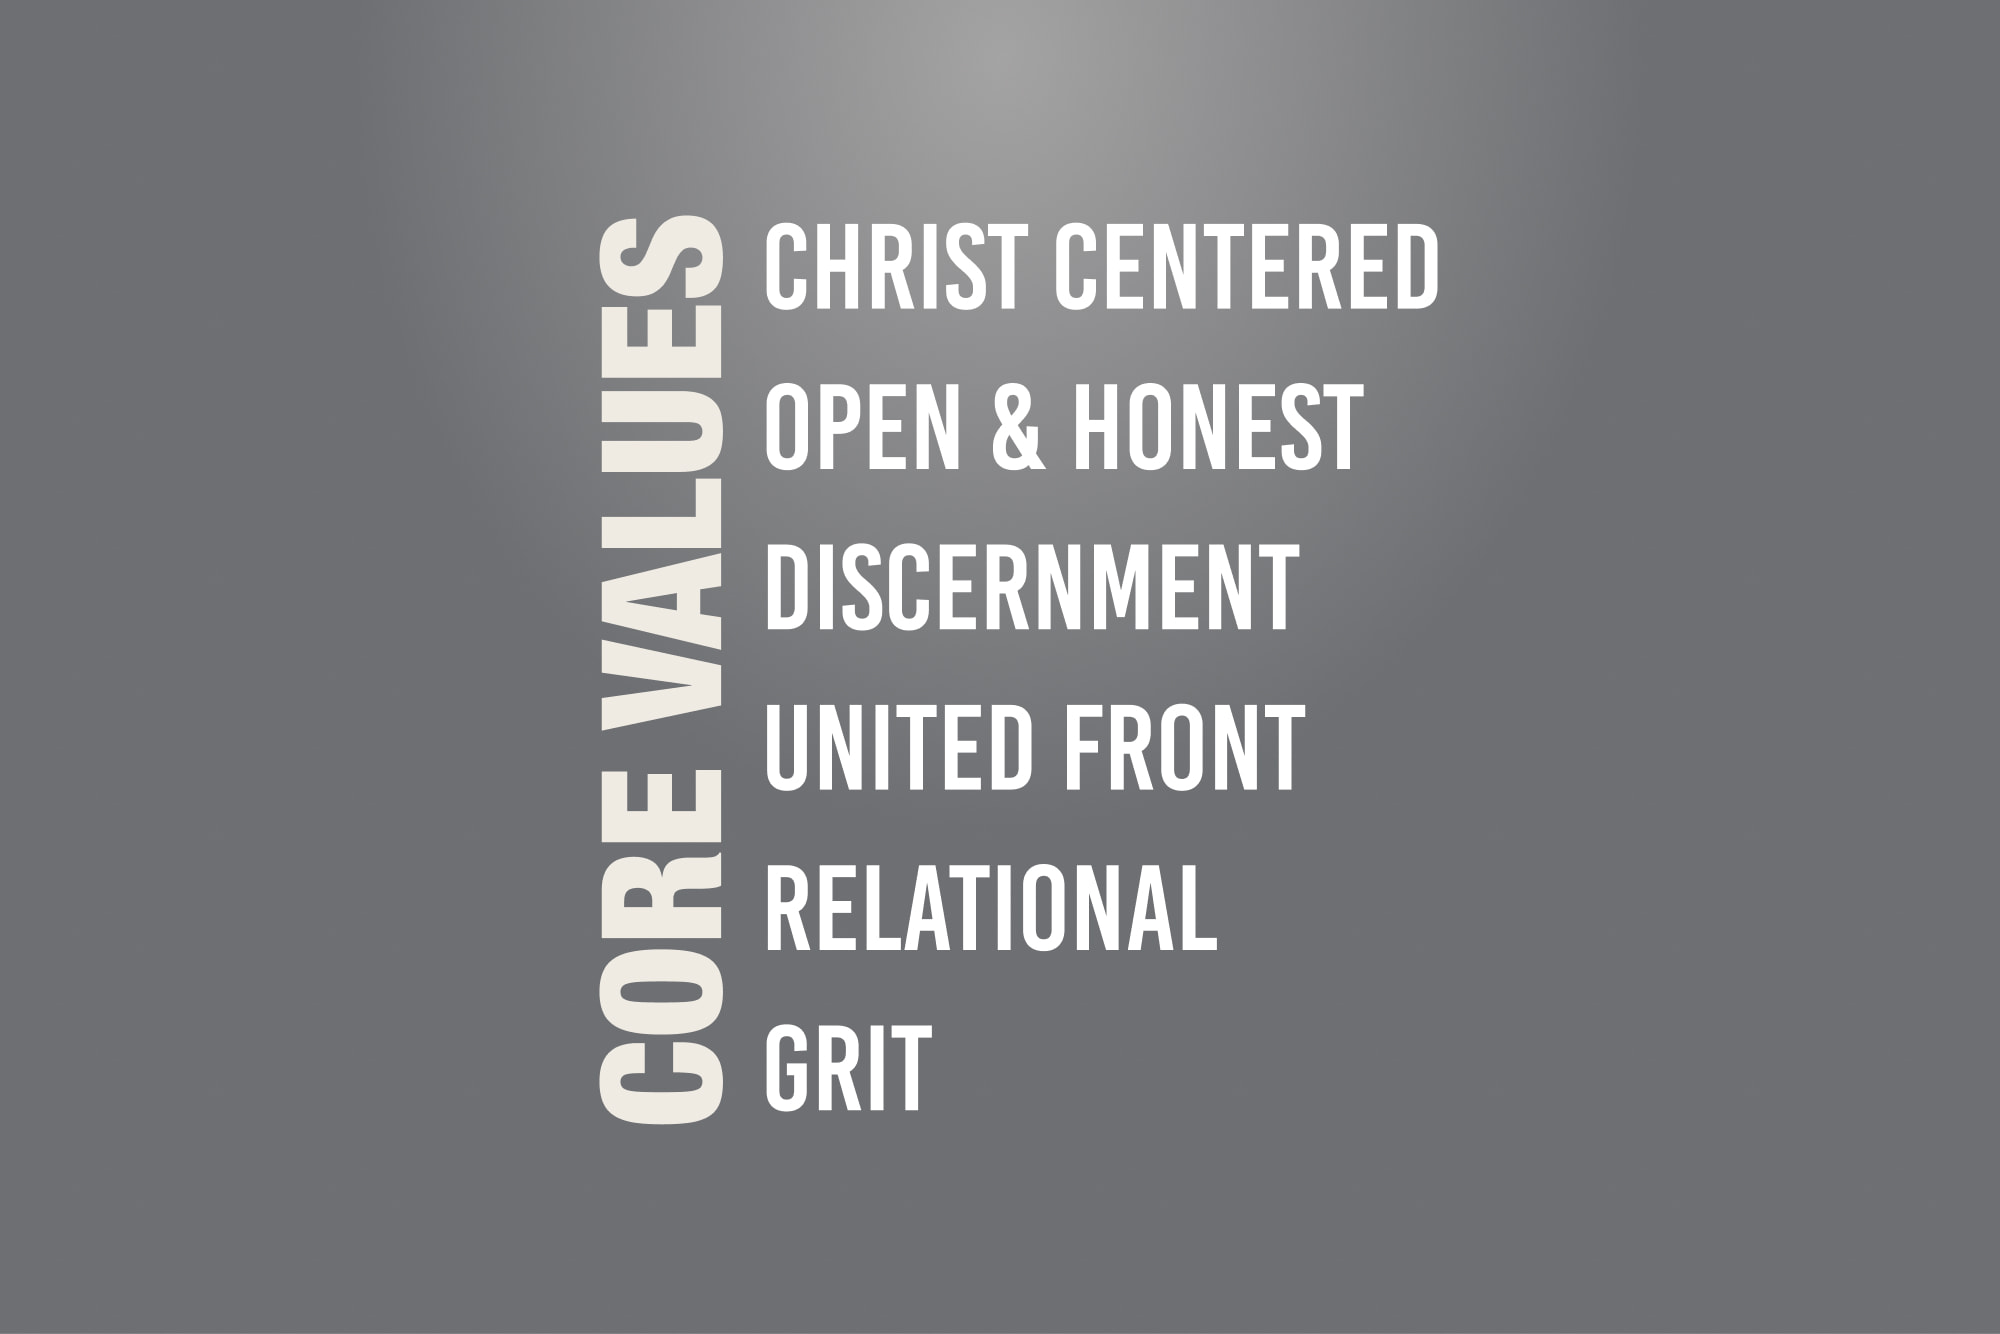 Christian treatment center core values that includes Christ centered, open and honest, discernment, united front, relational and grit 